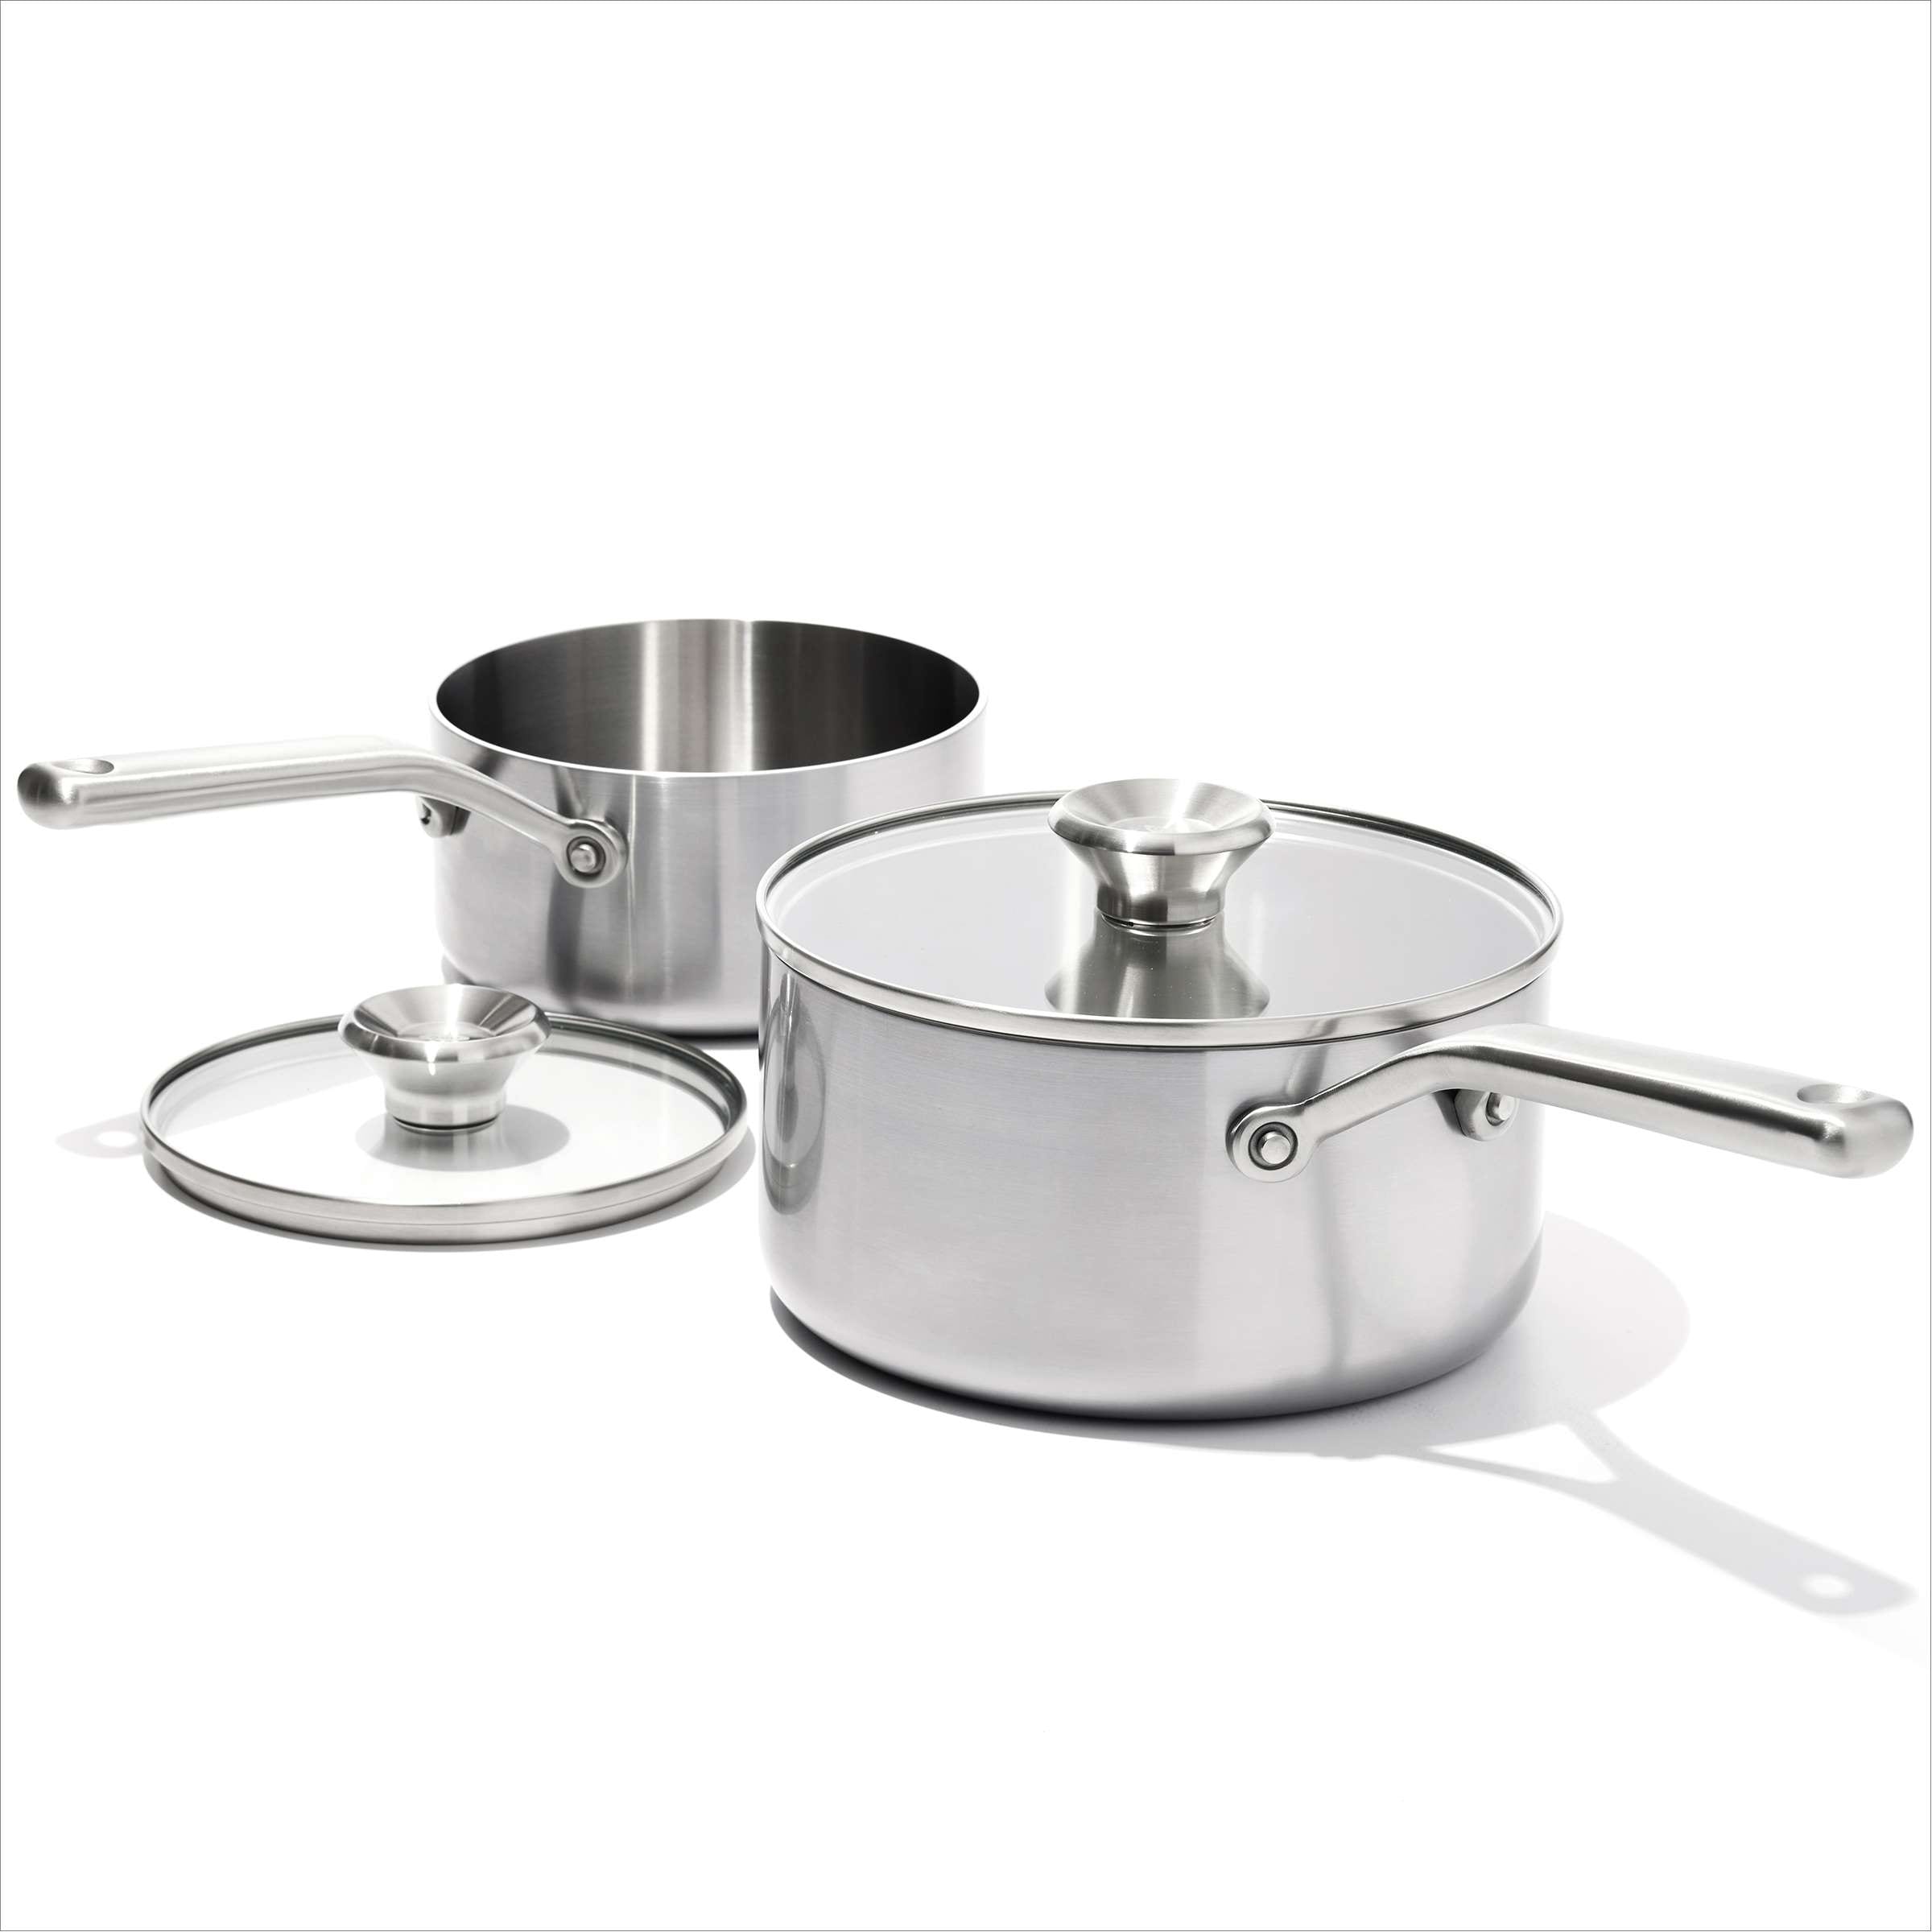 https://ak1.ostkcdn.com/images/products/is/images/direct/1e3d57adba36178329d45217024b6678070244ea/OXO-Mira-3-Ply-Stainless-Steel-Saucepan-Set%2C-1.6-Qt-and-3.25-Qt.jpg